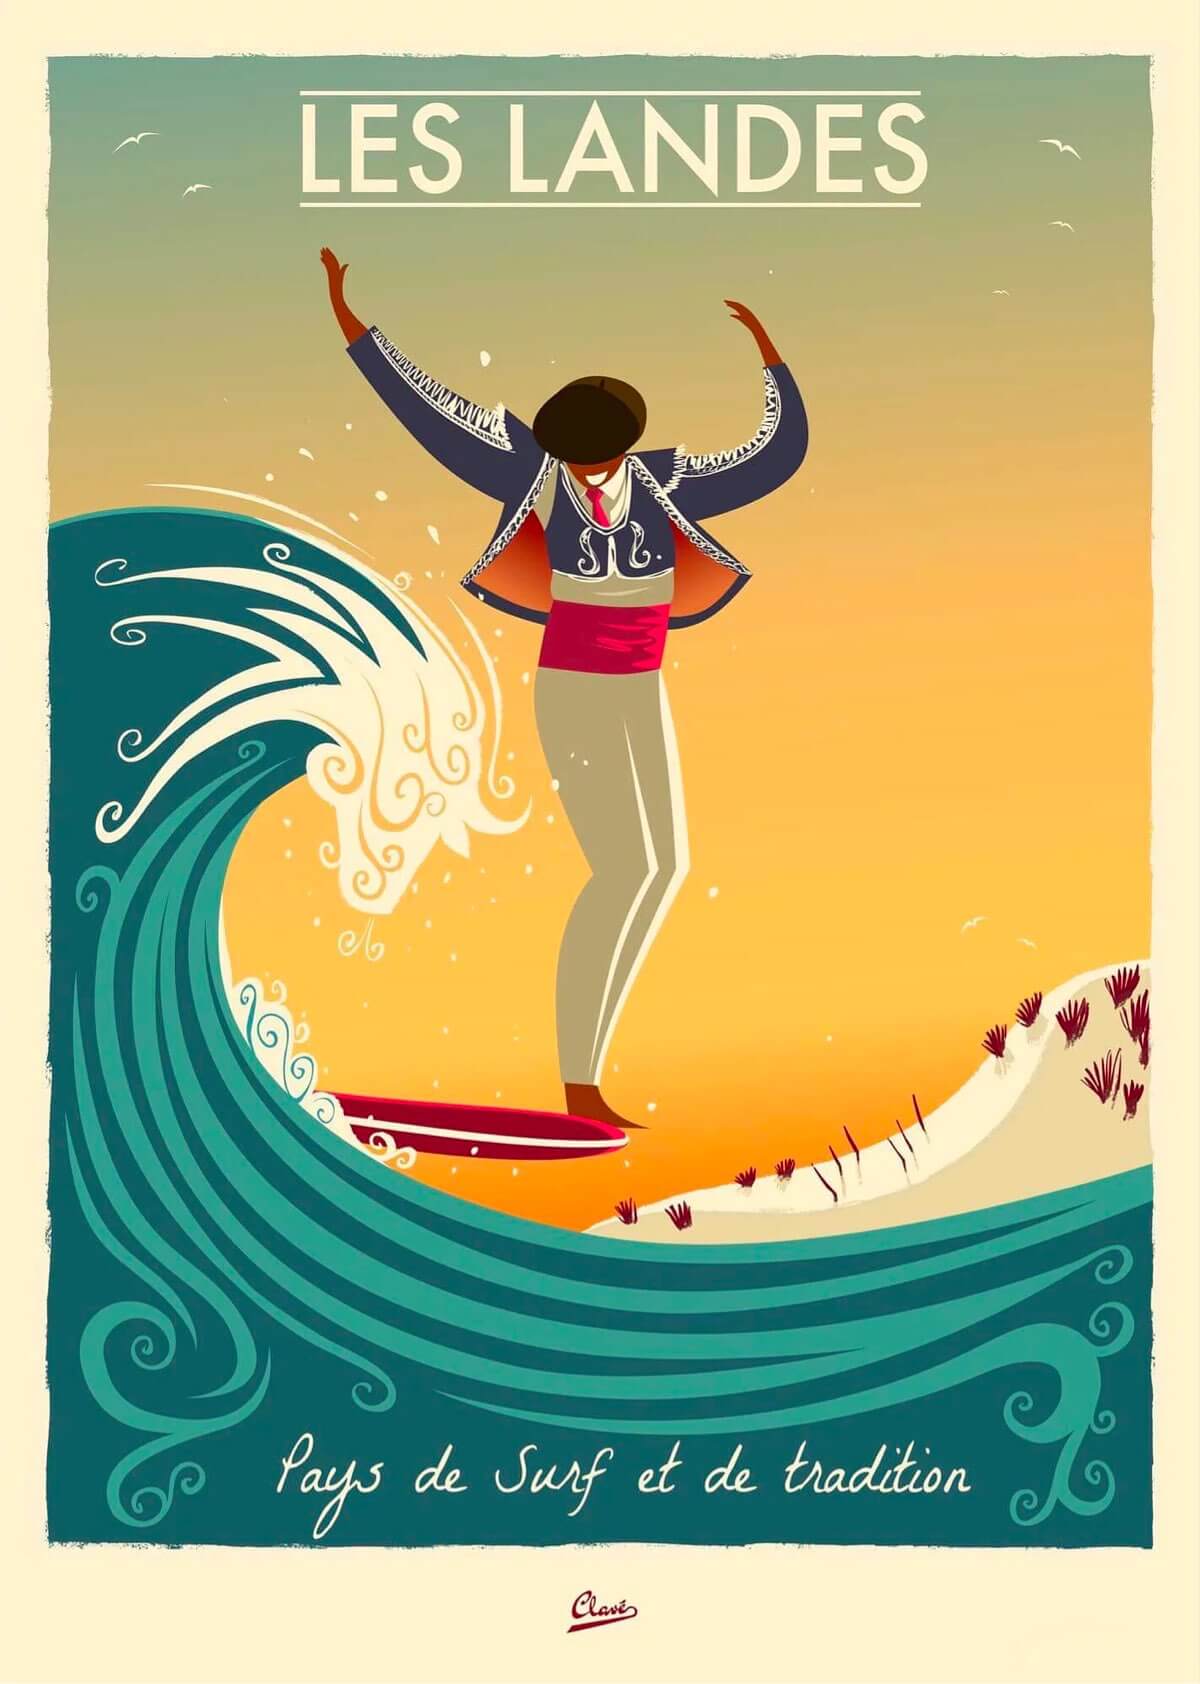 The Retractor surf illustration by Damien Clavé